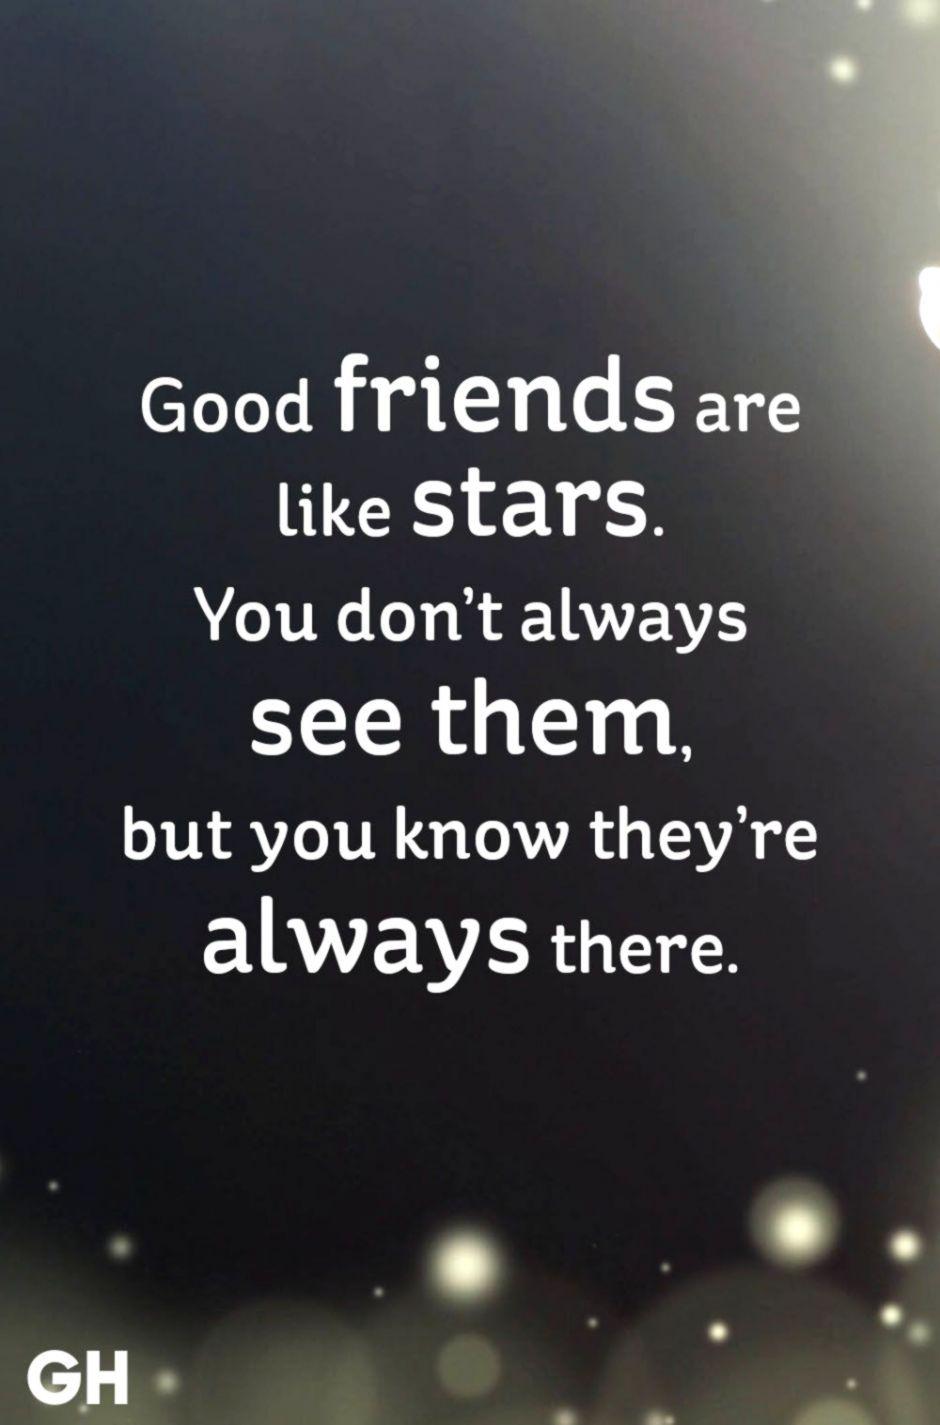 Quotes Wallpapers on Friendship